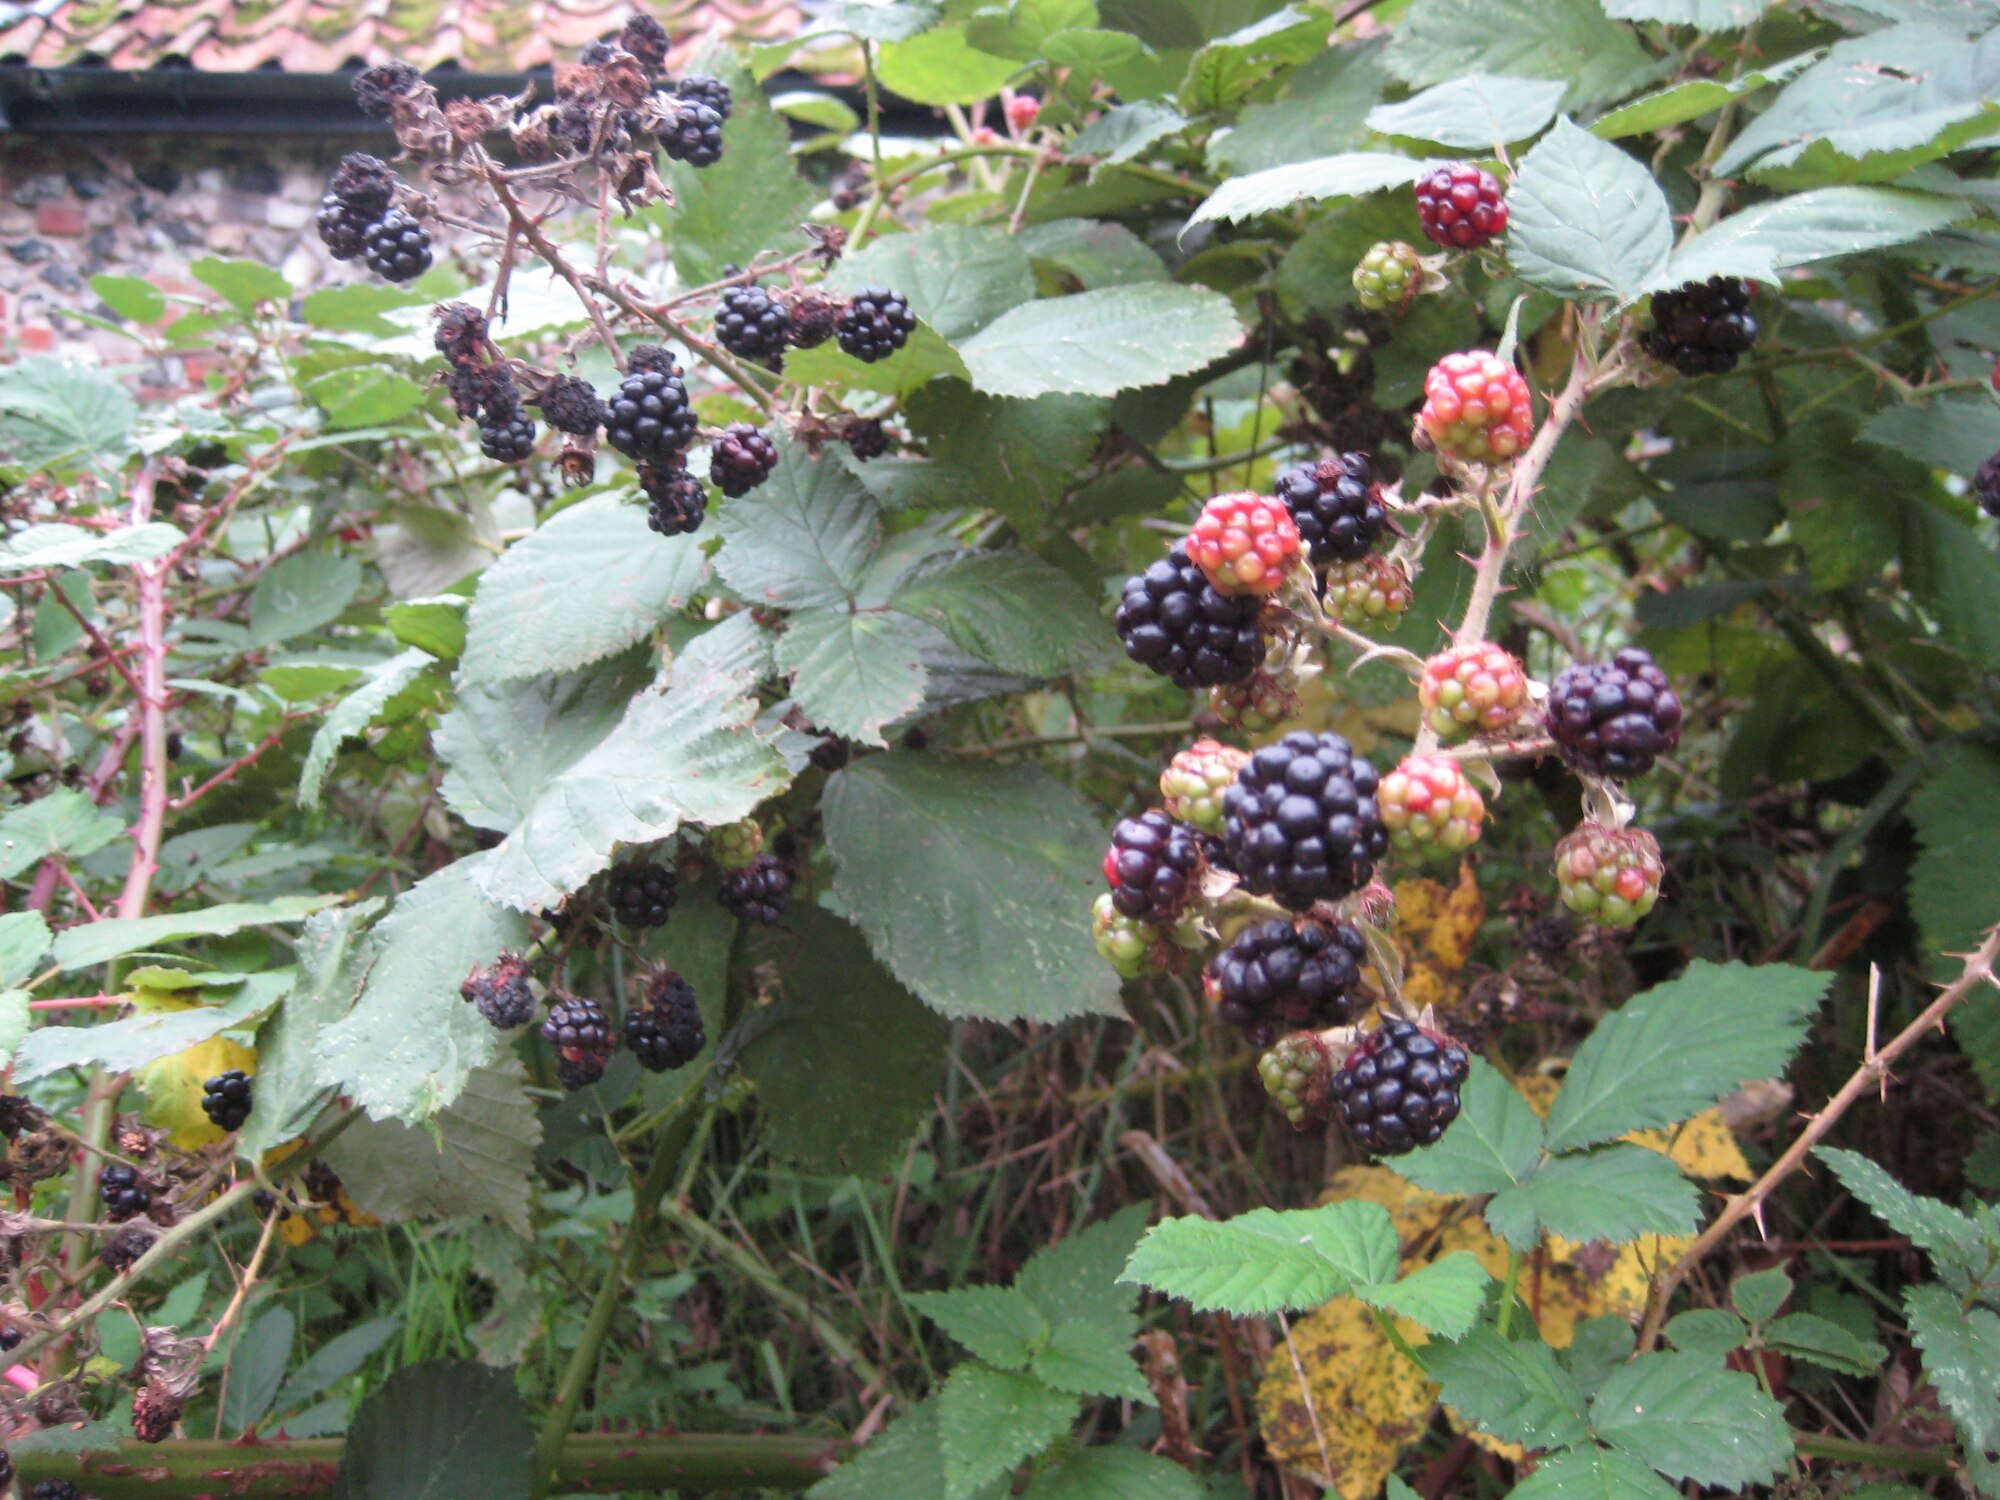 Blackberries are collected and eaten with great enthusiasm in Britain, where blackberrying occupies a special cultural niche as a uniquely rewarding leisure activity. Traditionally  blackberries should not be picked after Michaelmas (Sept. 29) . Folklore says that after this date, the devil spits or stamps on the berries, rendering them unfit. (Photo by Suzanne Harper)